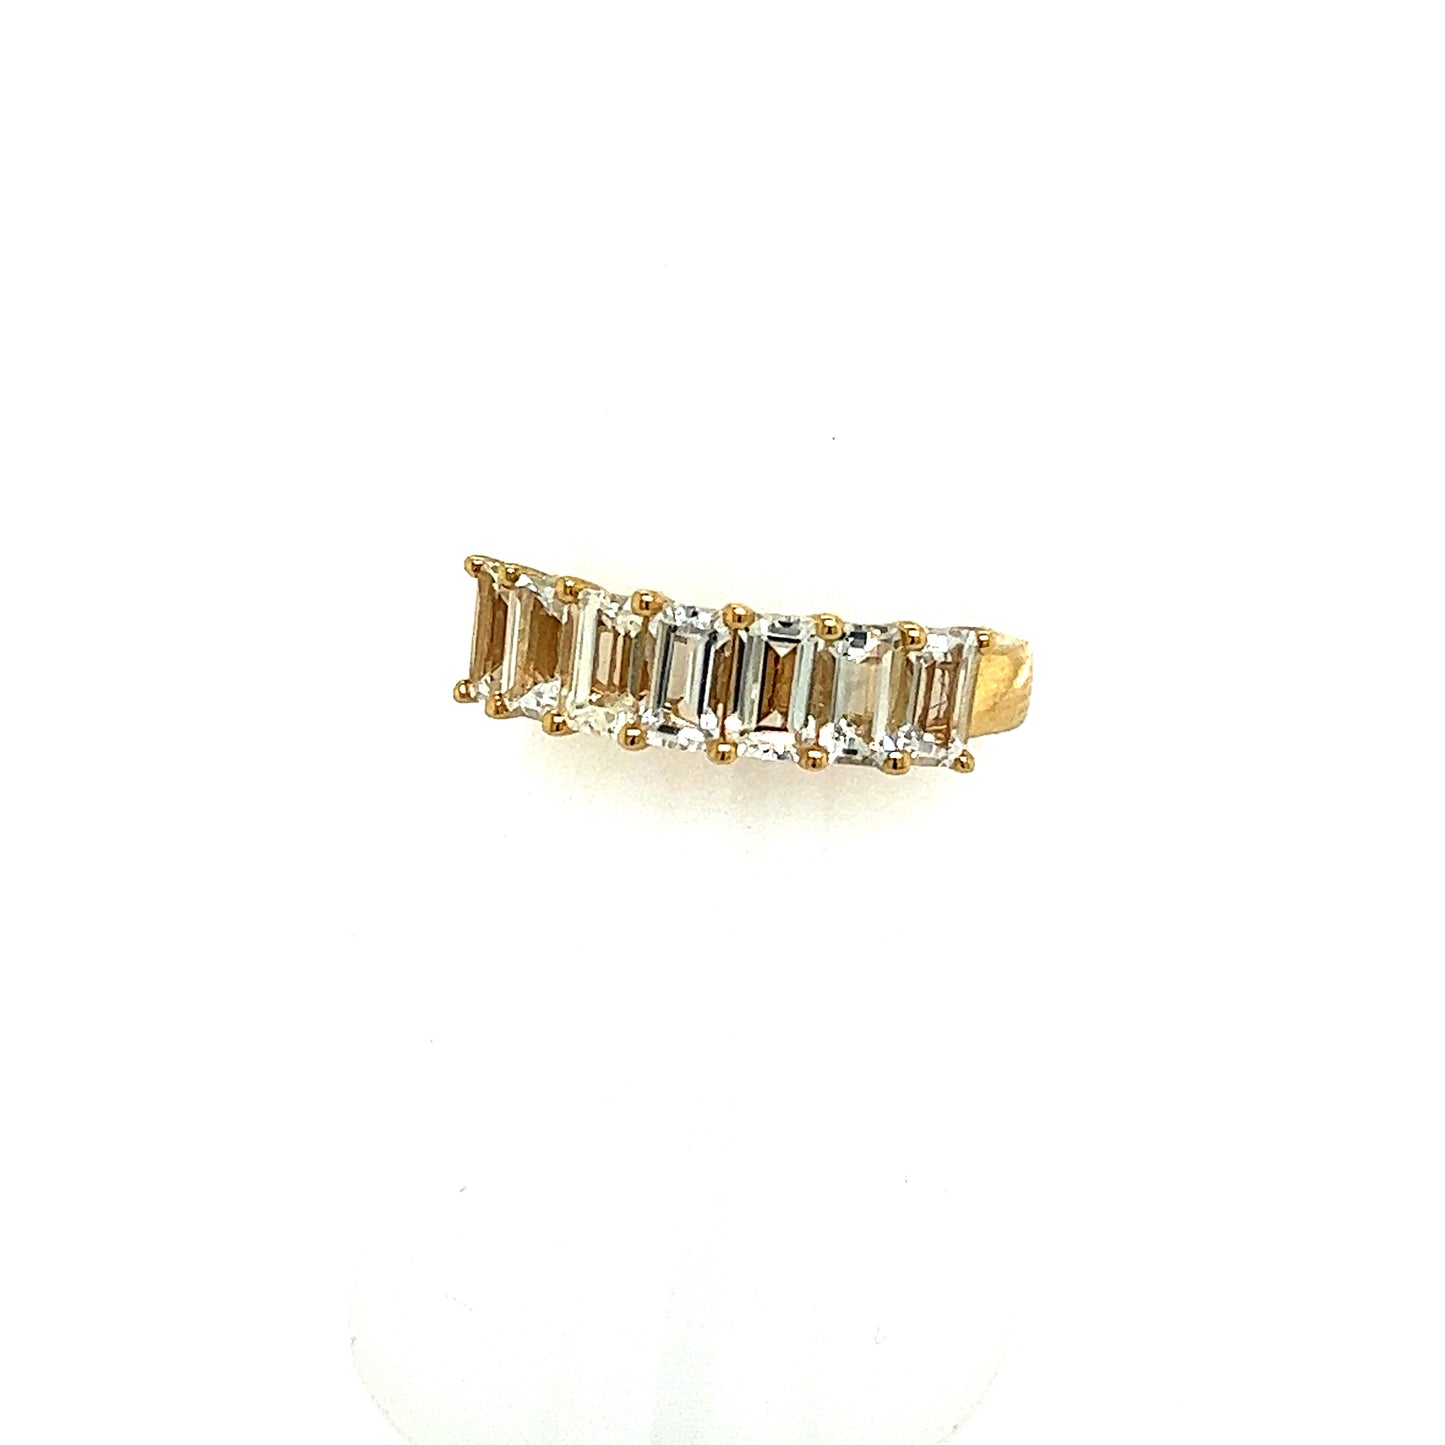 Natural White Sapphire Ring Size 6.5 14k Y Gold 3.36 TCW Certified $3,950 217065 - Certified Fine Jewelry